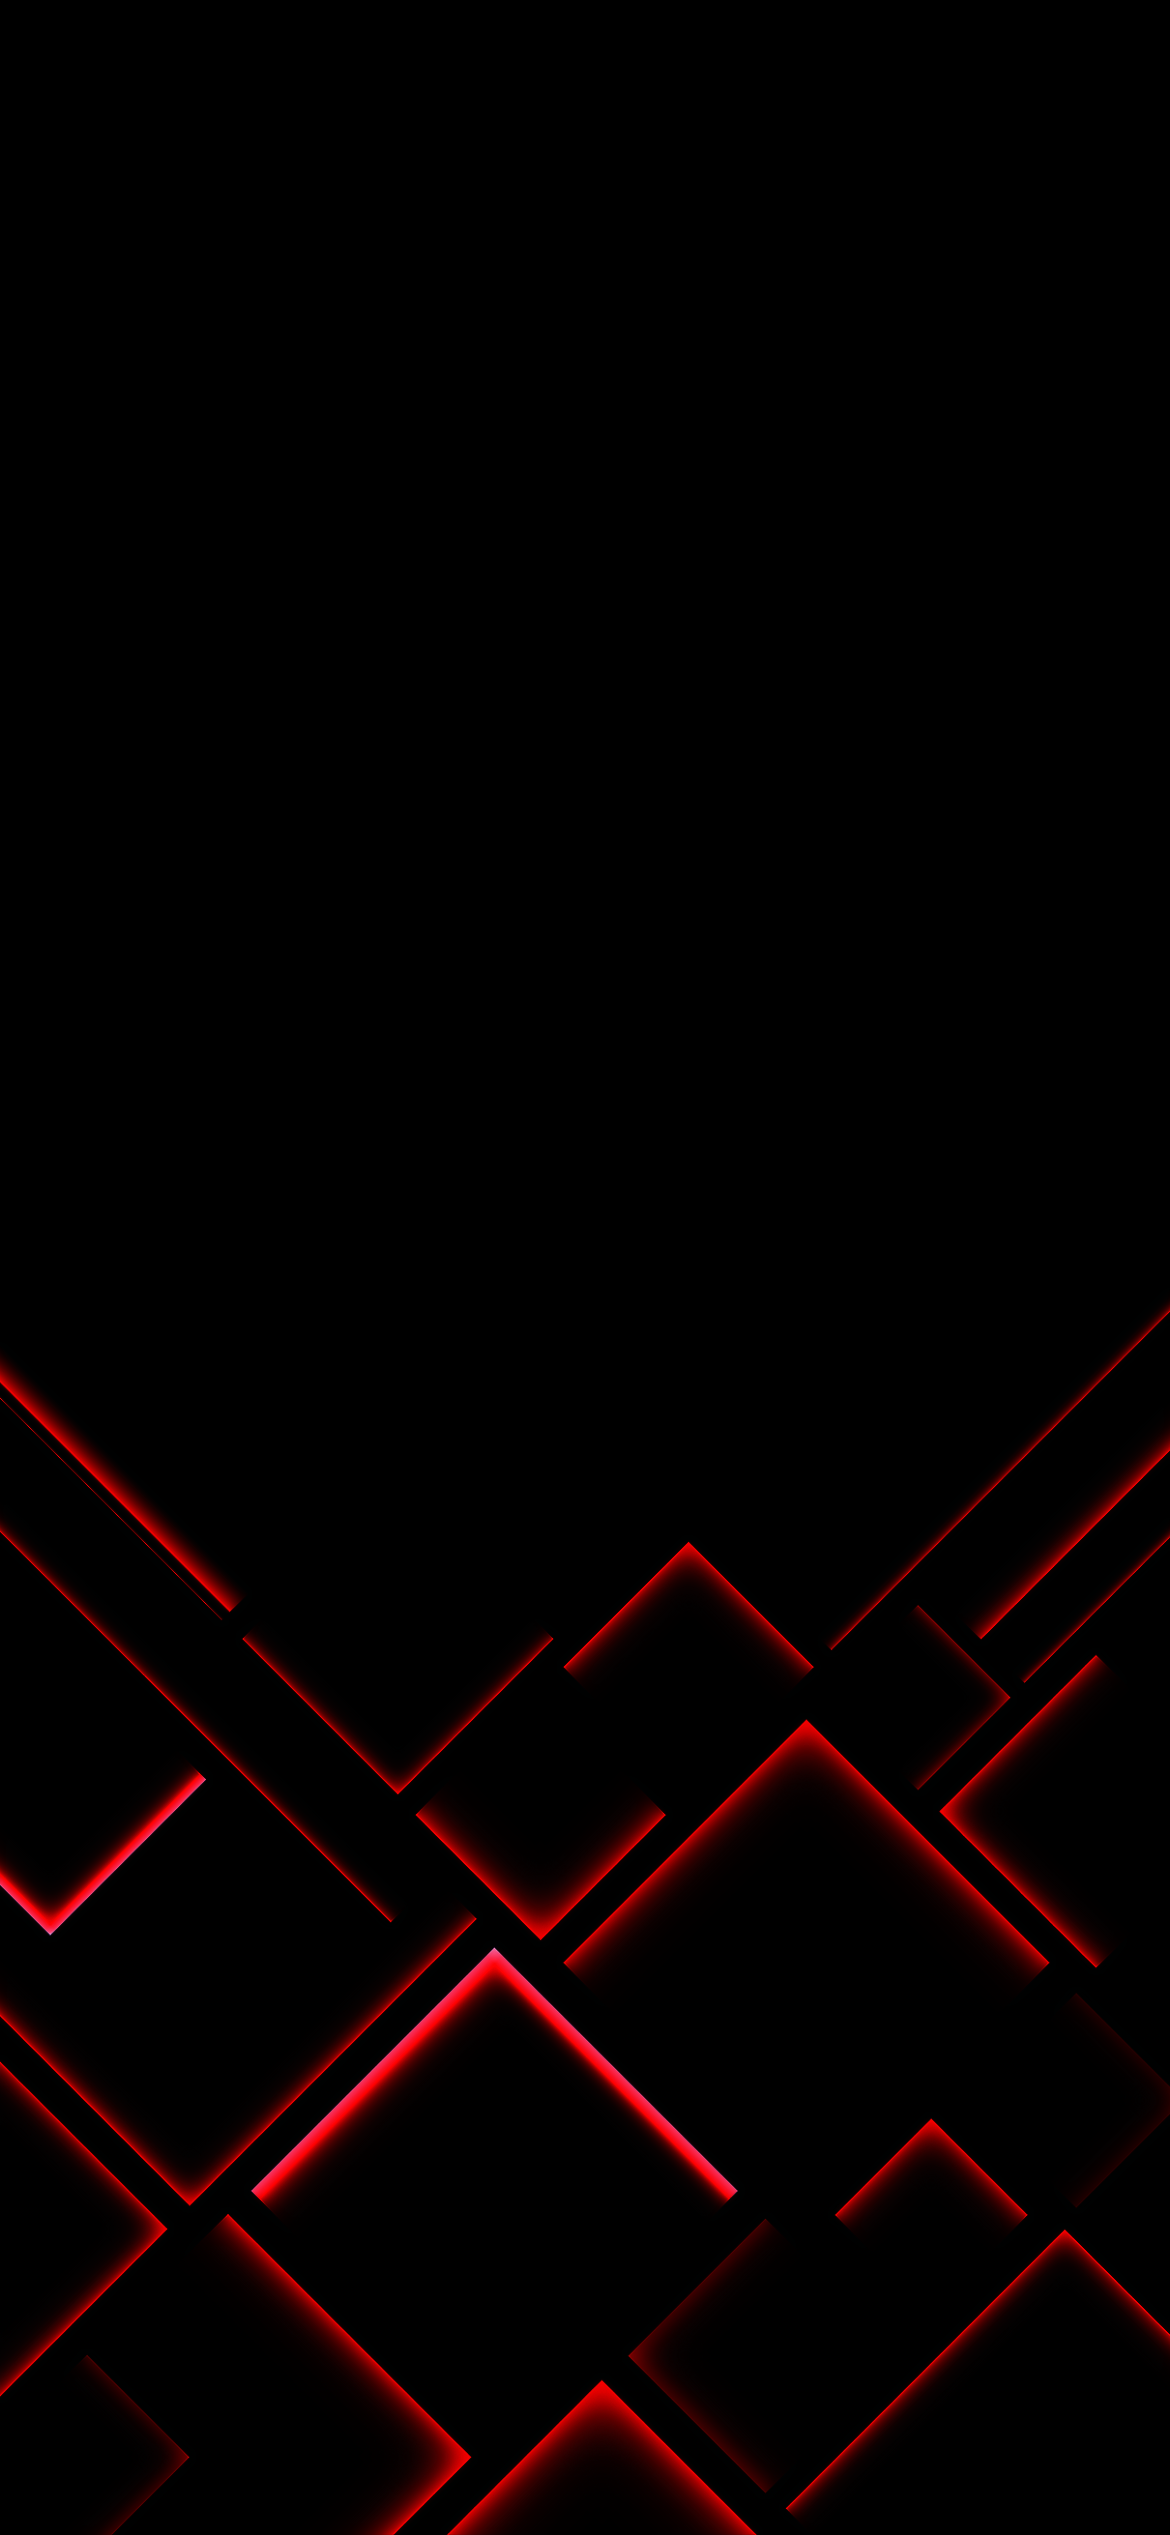 Wallpaper Amoled, OLED, Light, Triangle, Material Property, Background Free Image